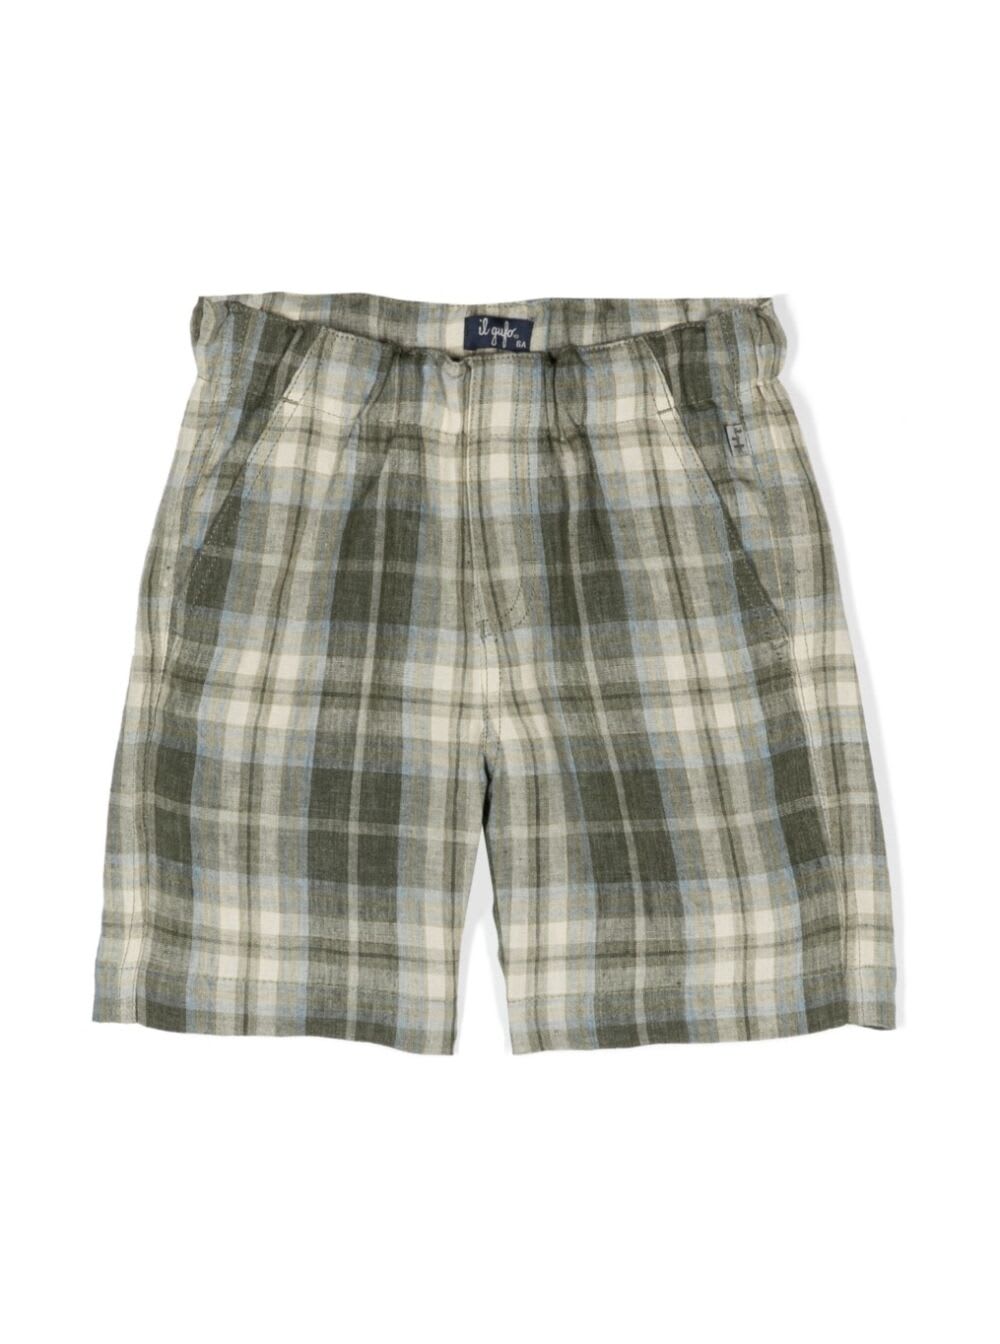 IL GUFO MULTICOLOR BERMUDA SHORTS WITH ELASTIC WAISTBAND AND LOGO PATCH IN LINEN BOY